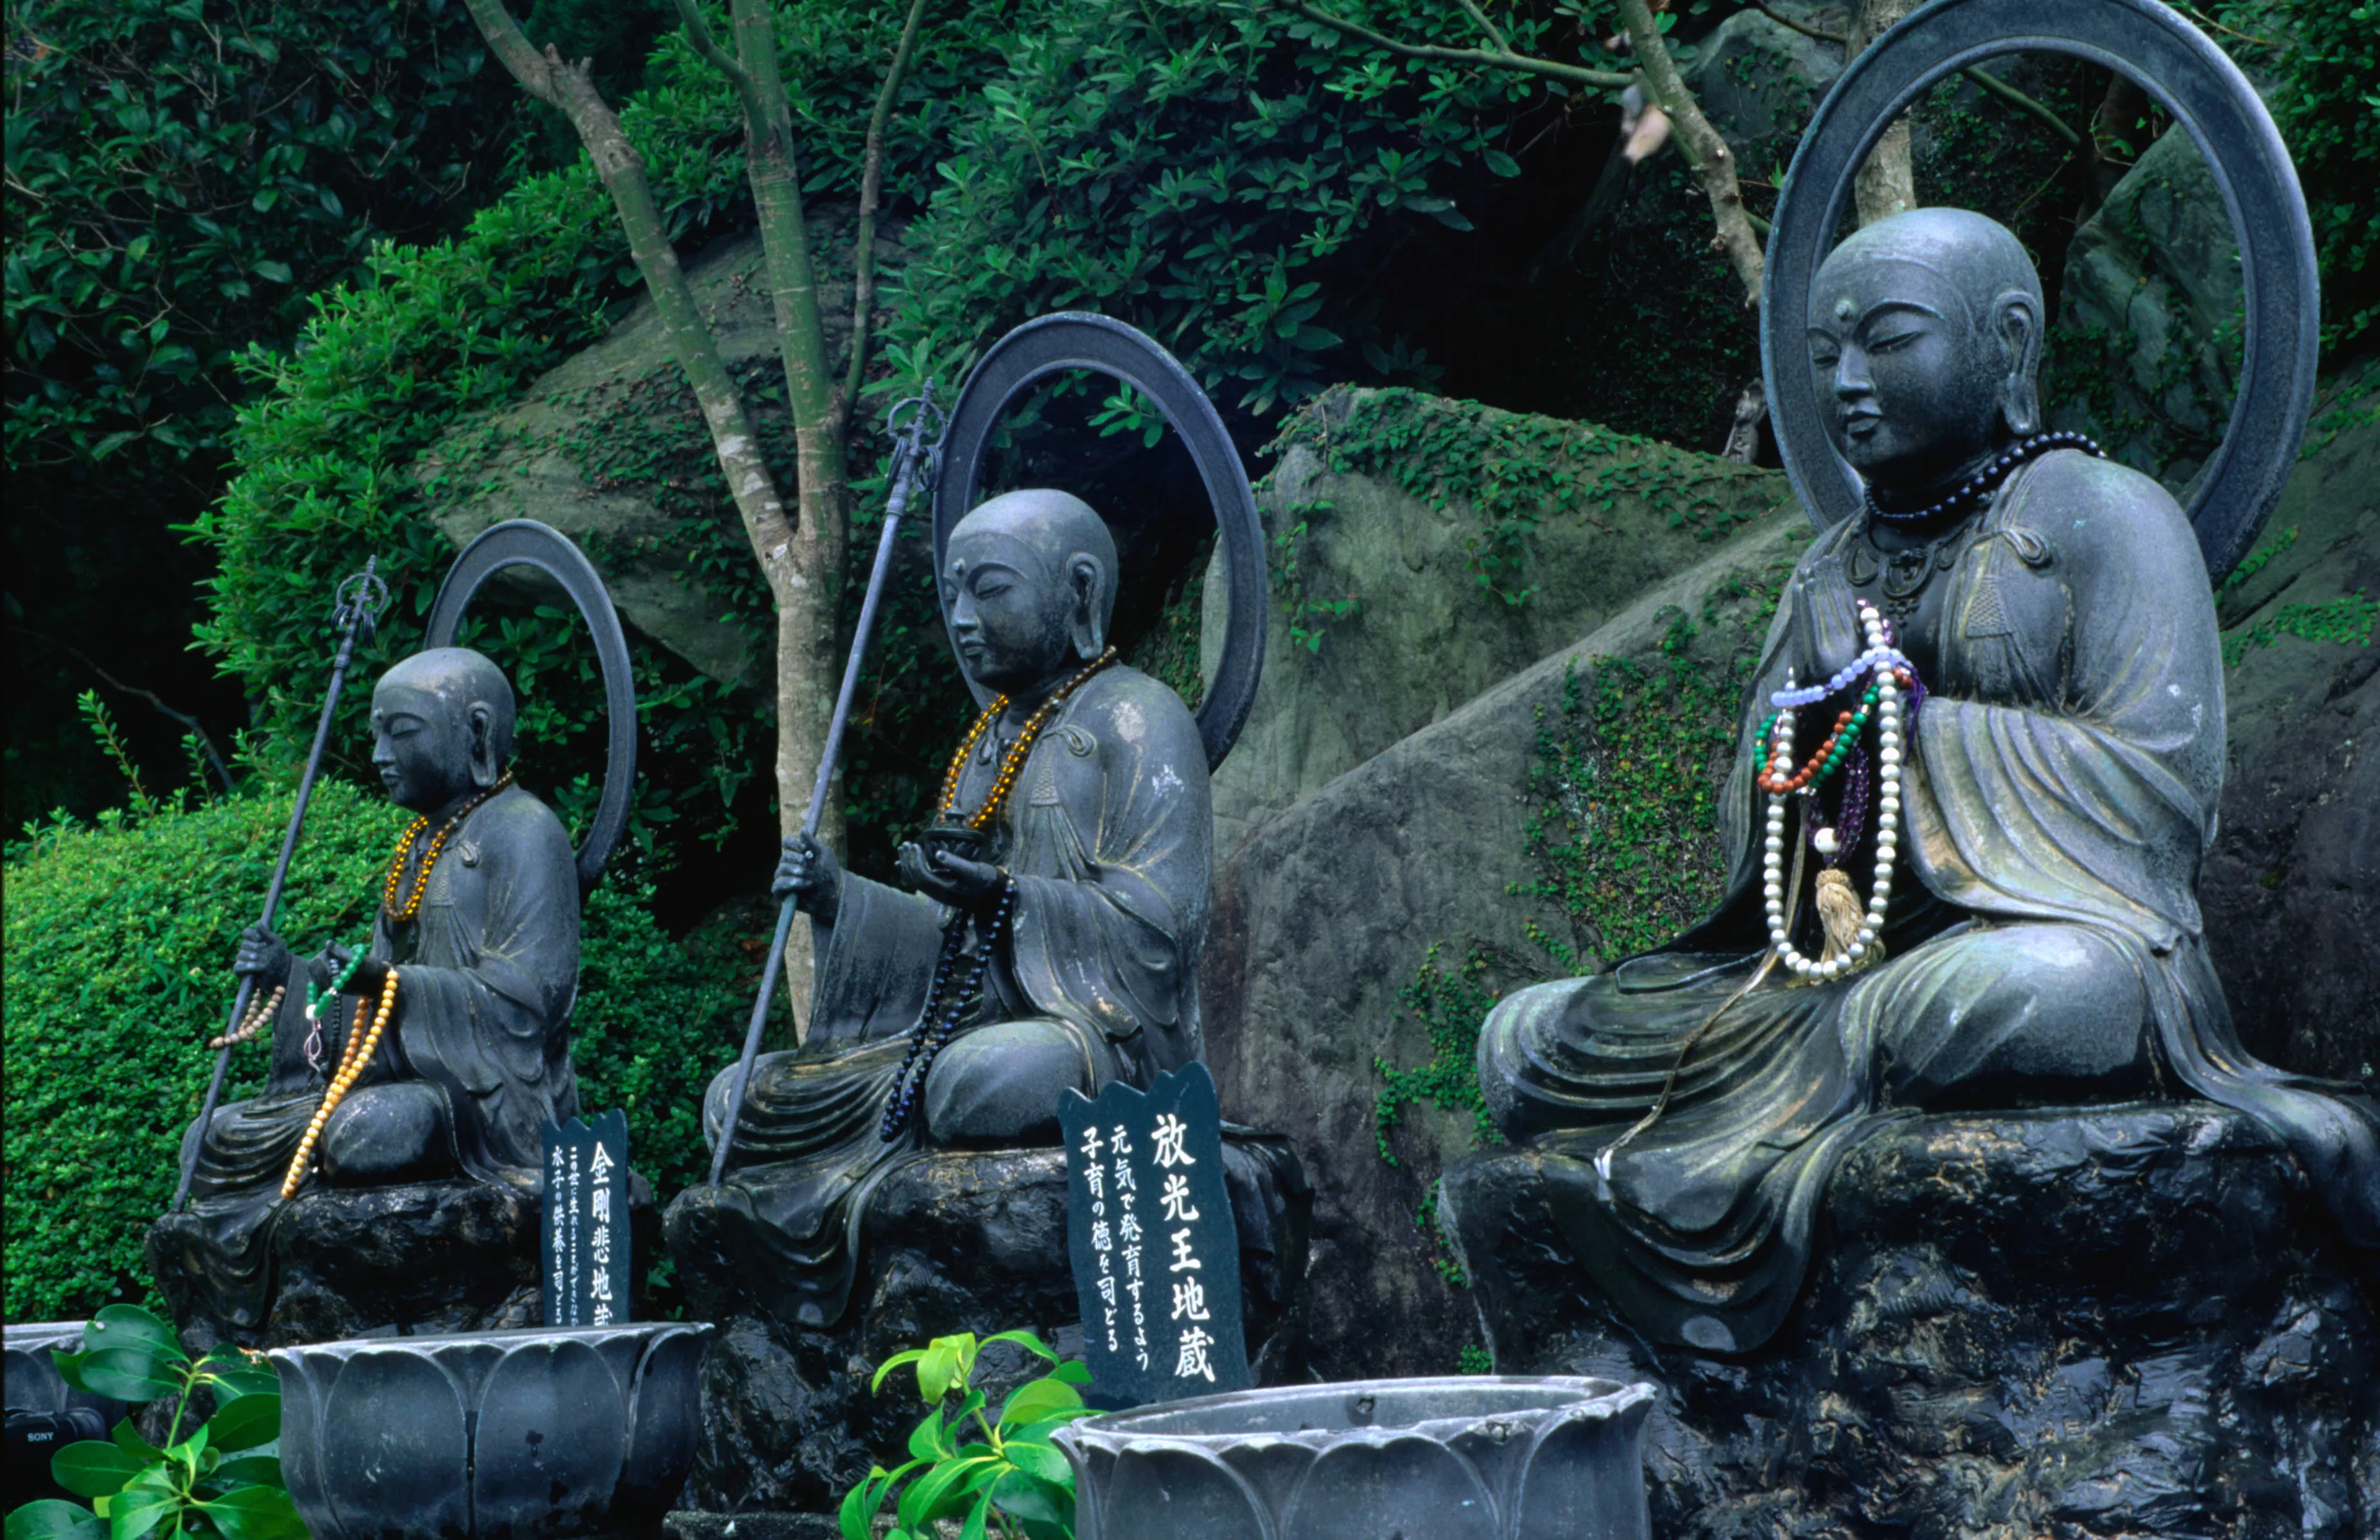 Statues depicting the disciples of the Buddha at Daigan-ji, a temple in Japan.